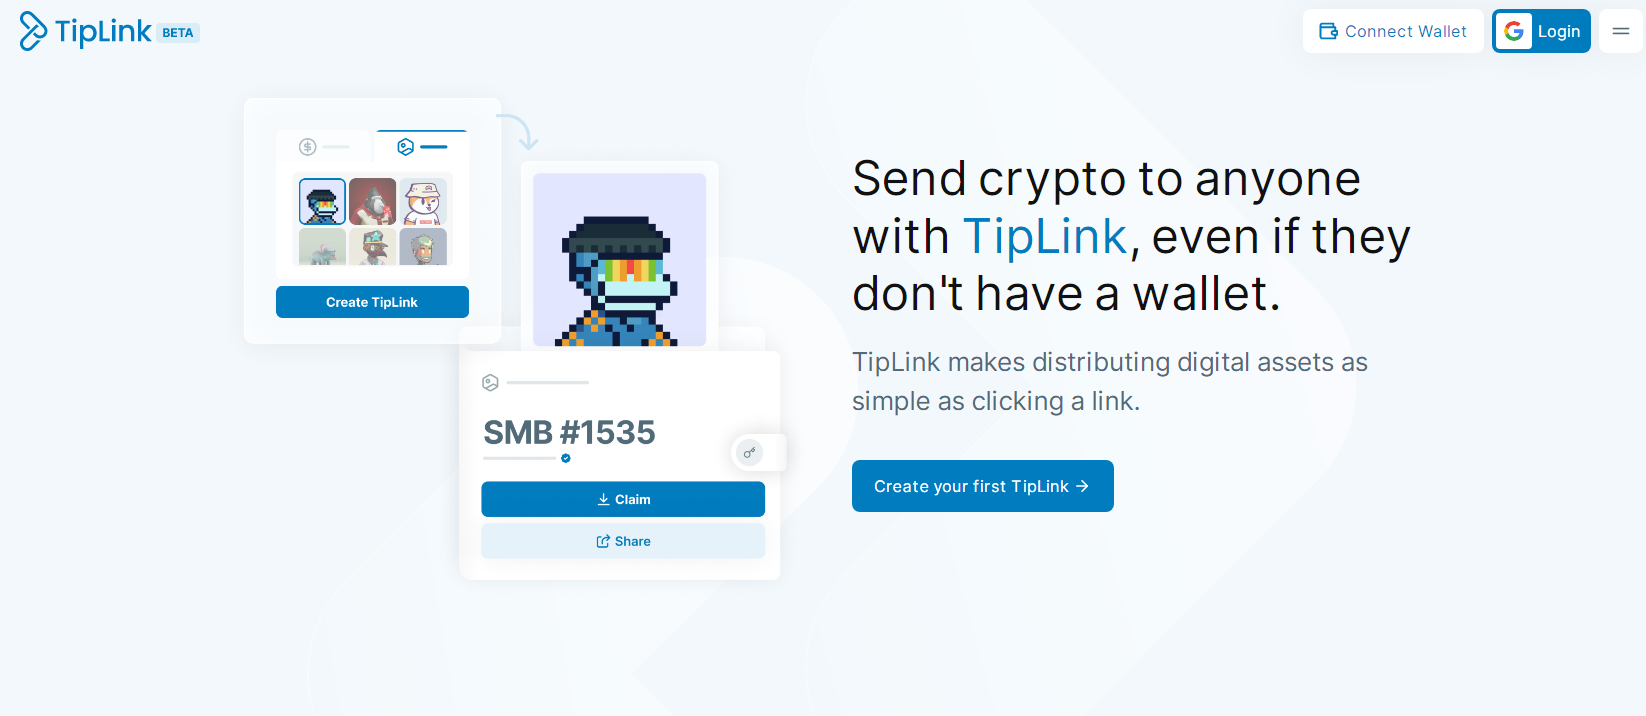 TipLink Has Announced Seed-round Funding of $6 Million.